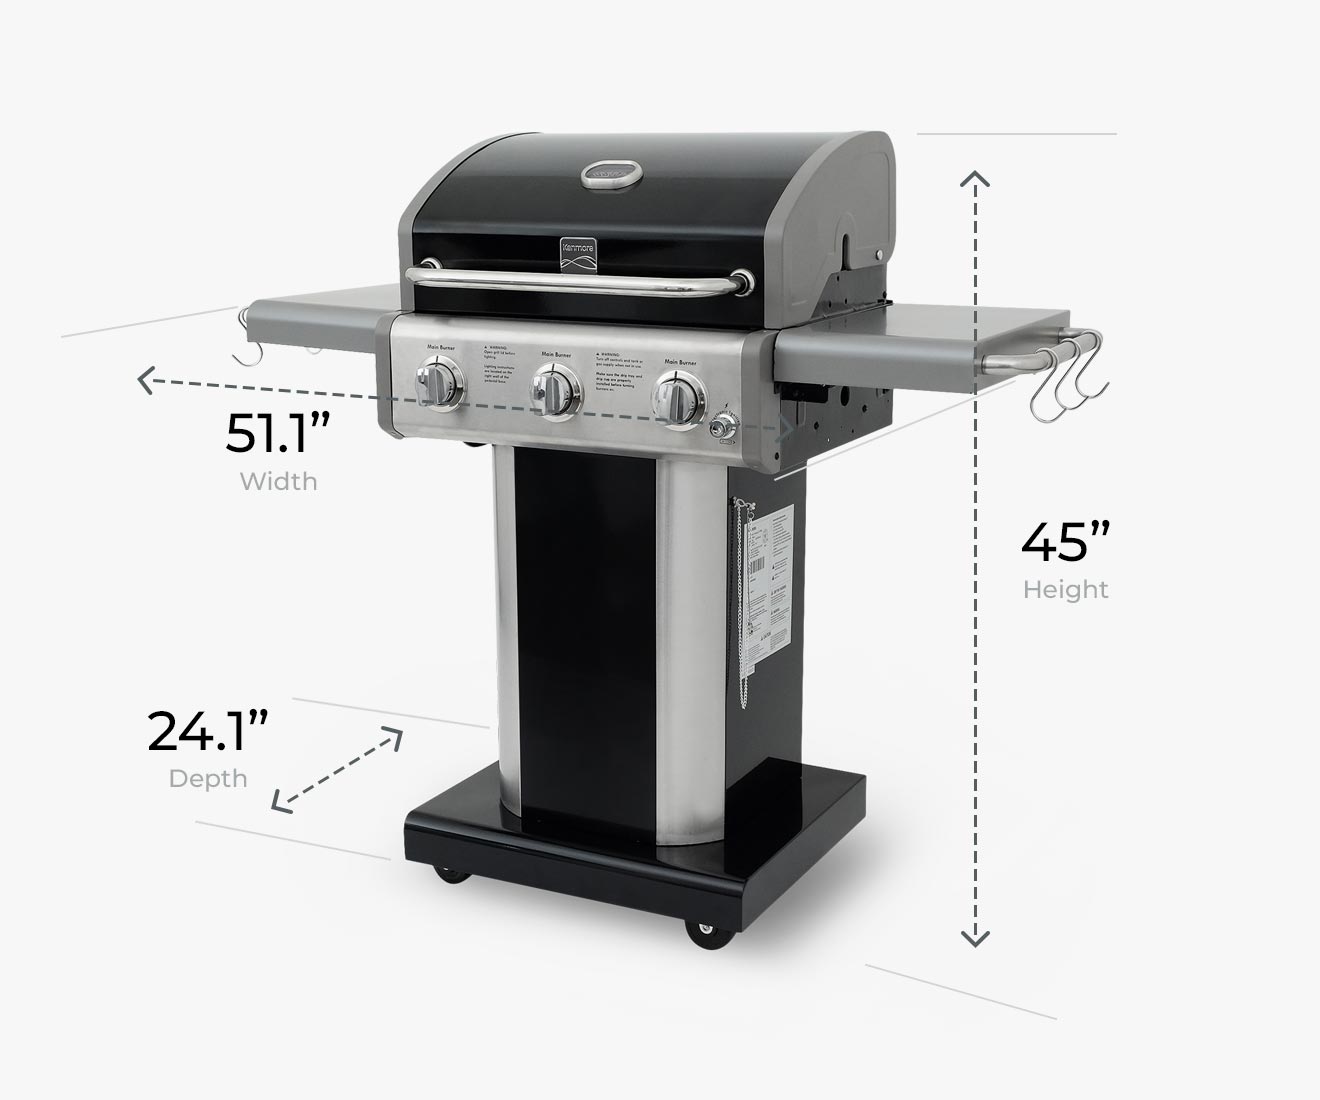 Kenmore 3-Burner Gas Grill in Black Pedestal Style PG-4030400LD Compact Dimensions